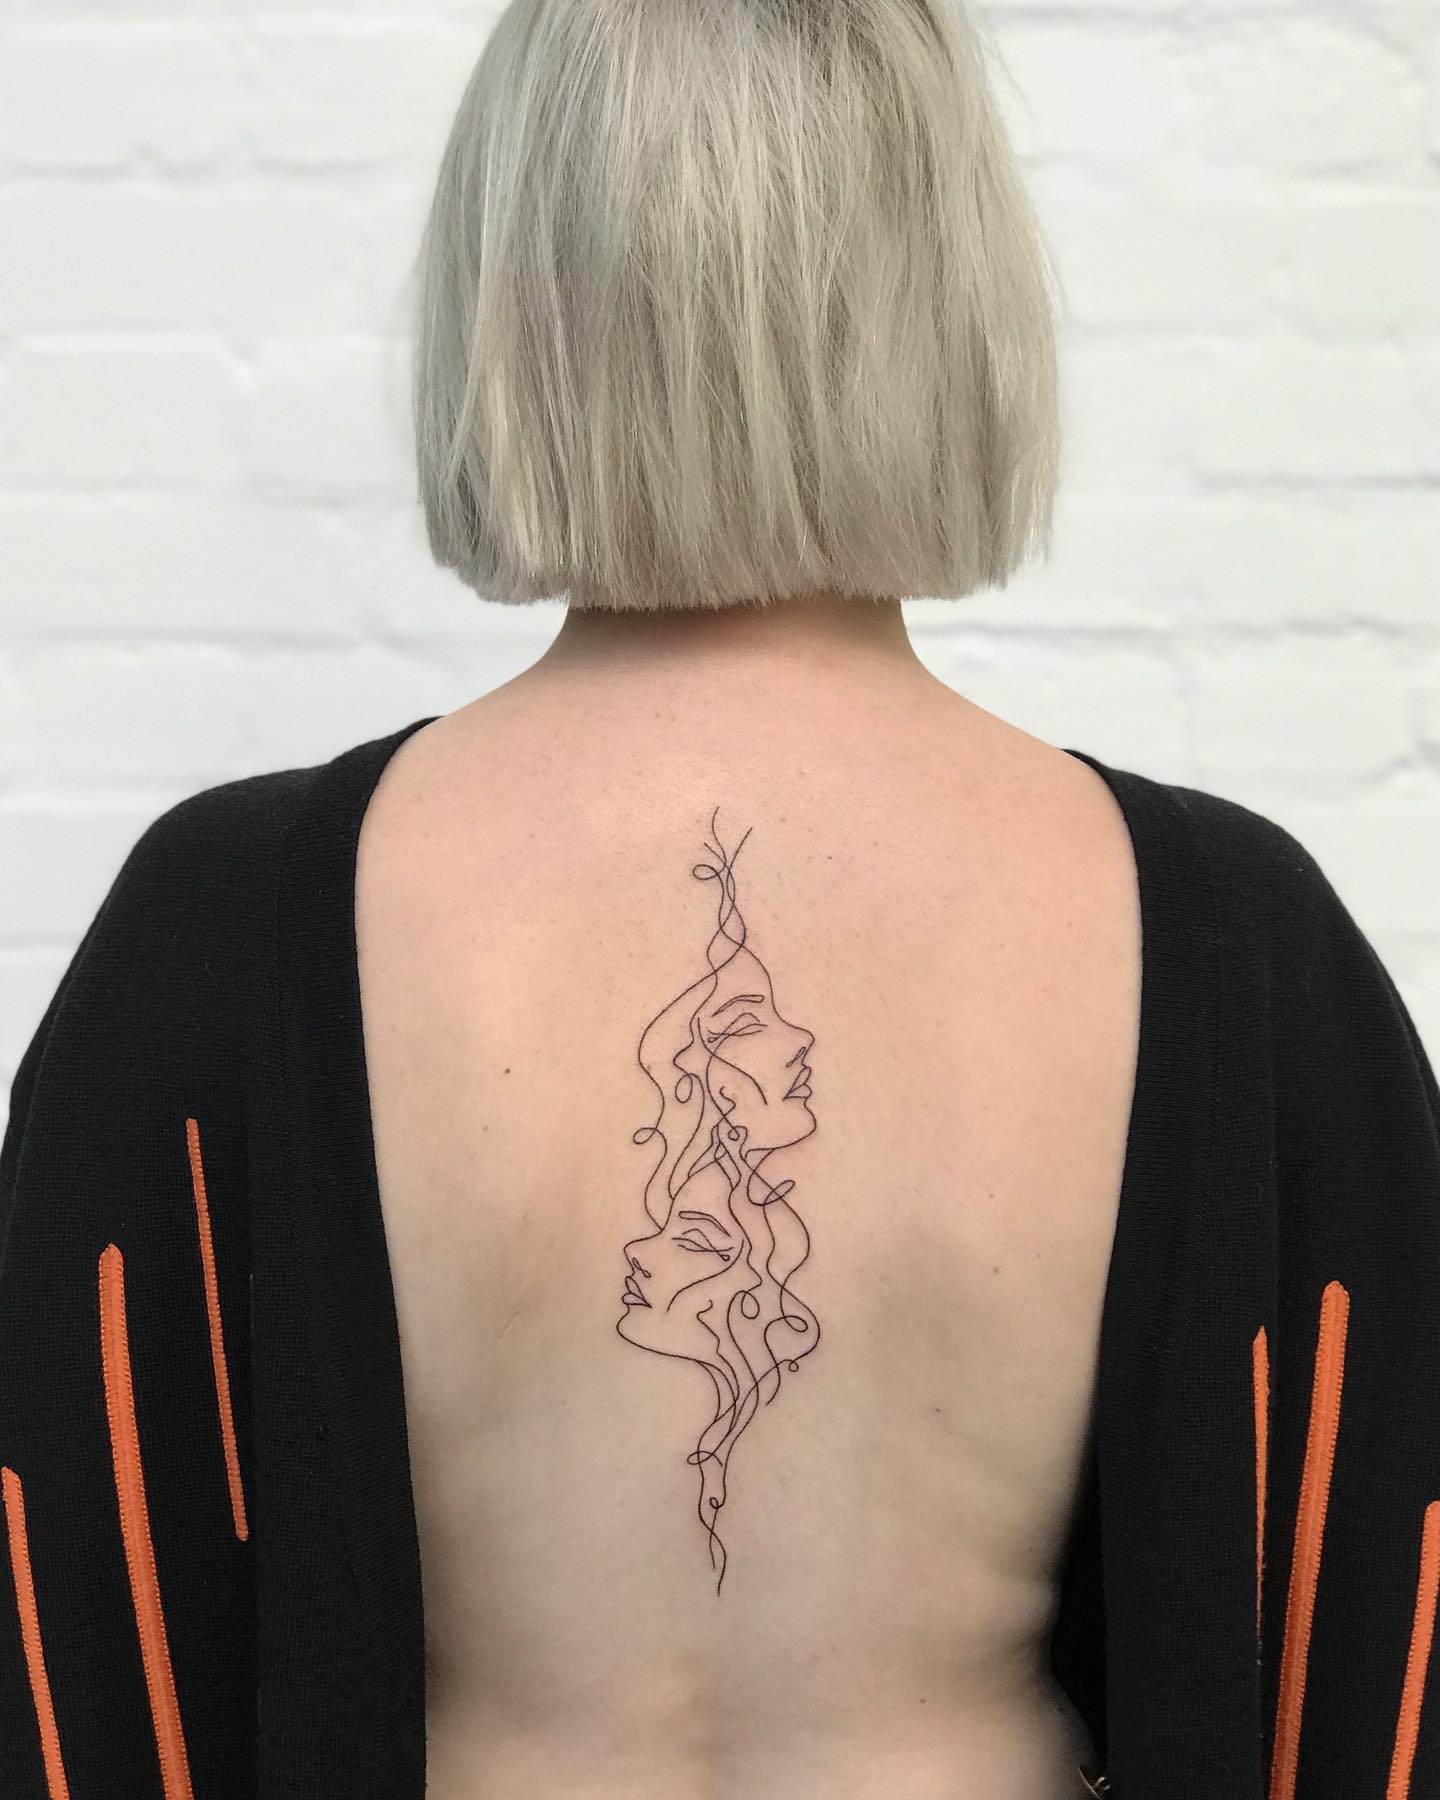 If your zodiac sign is Gemini you’re going to enjoy this black ink tattoo concept. It is cool for those who know how to appreciate minimalism.